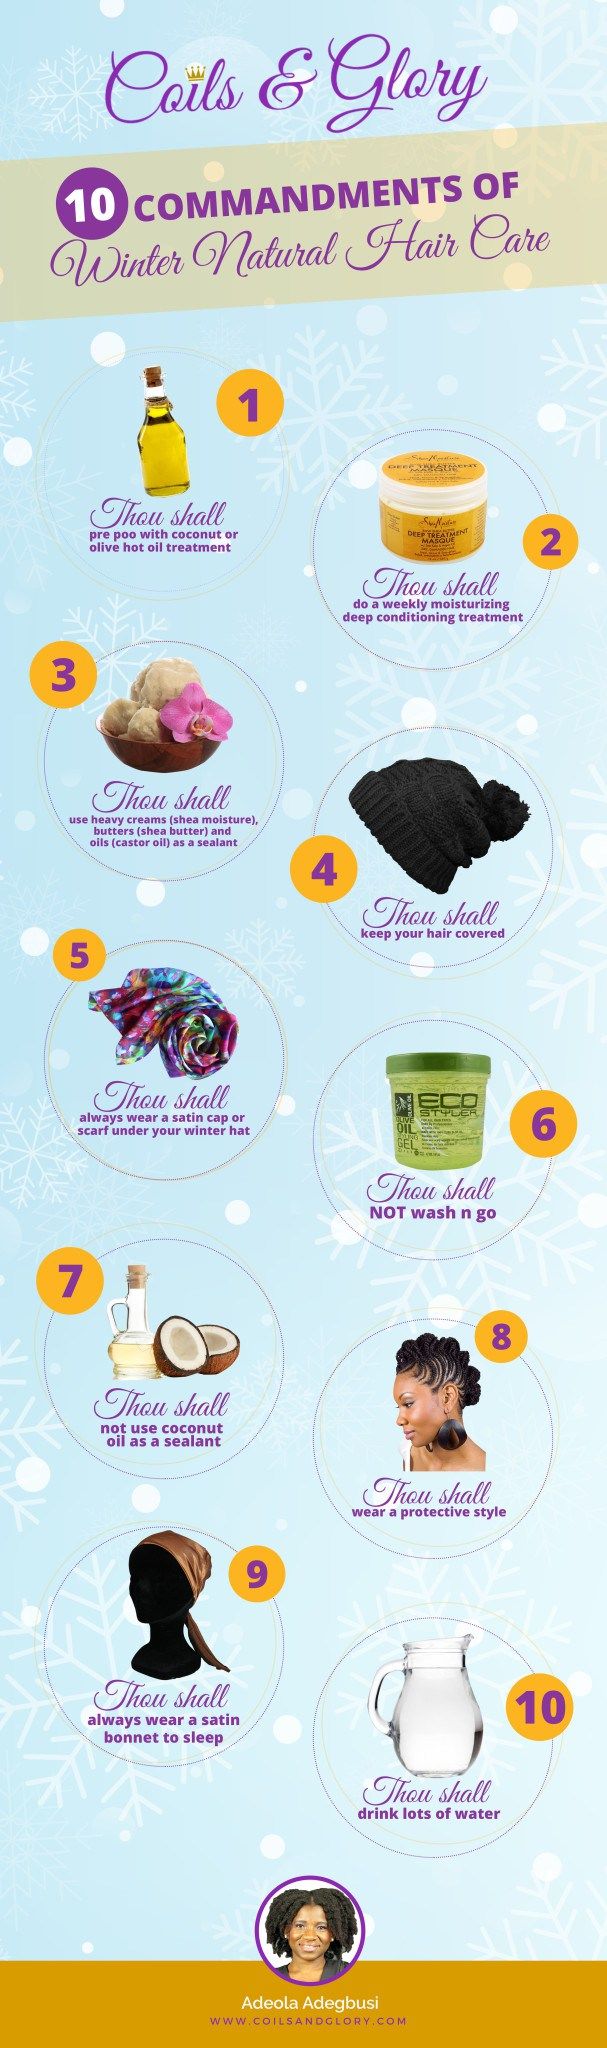 10 Commandments of Winter Natural Hair Care – Coils & Glory